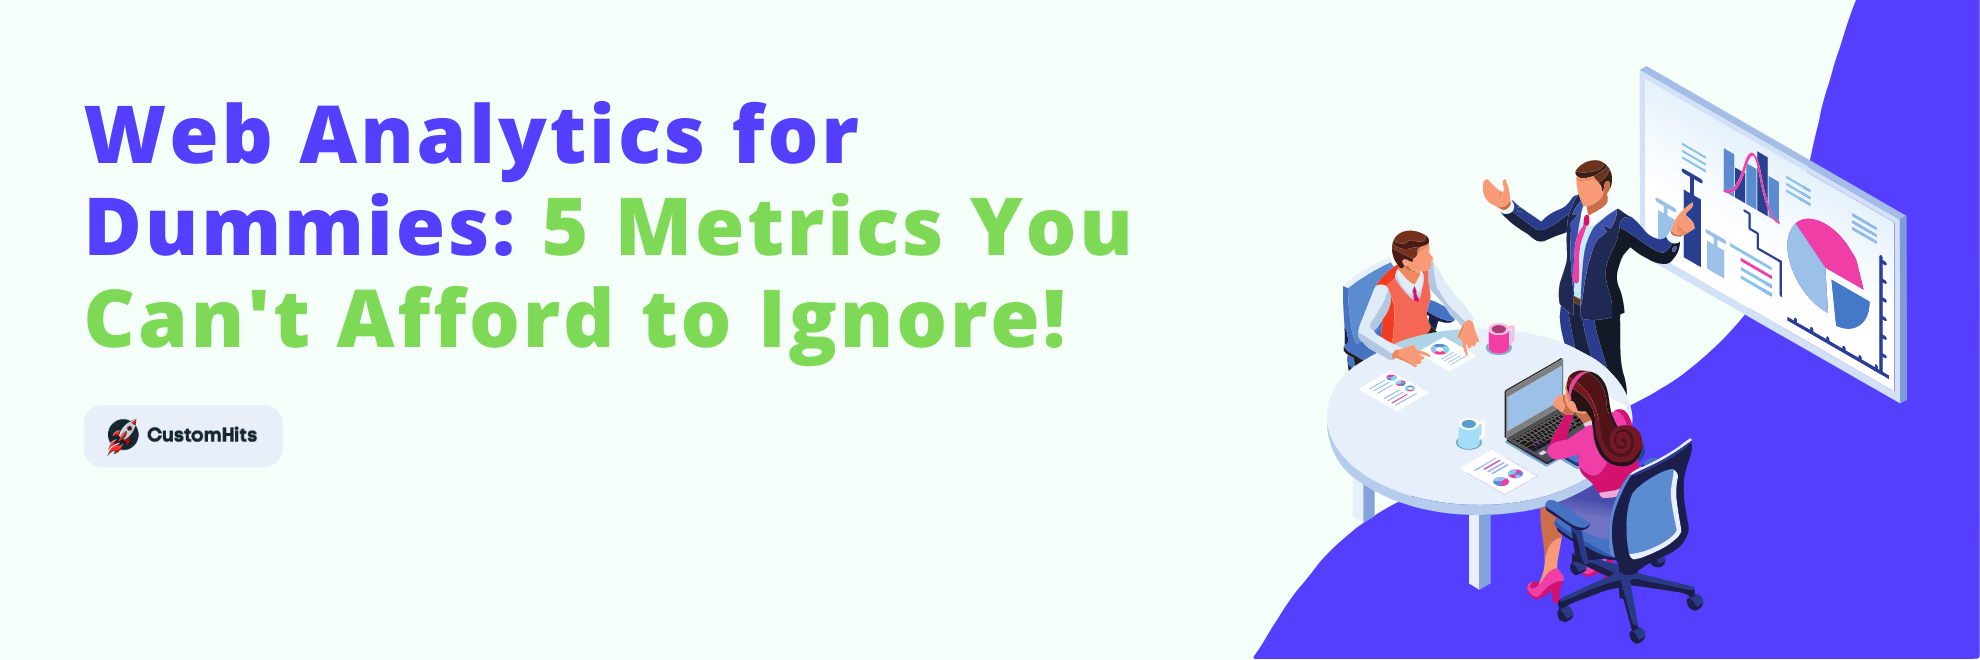 Web Analytics for Dummies: 5 Metrics You Can't Afford to Ignore!